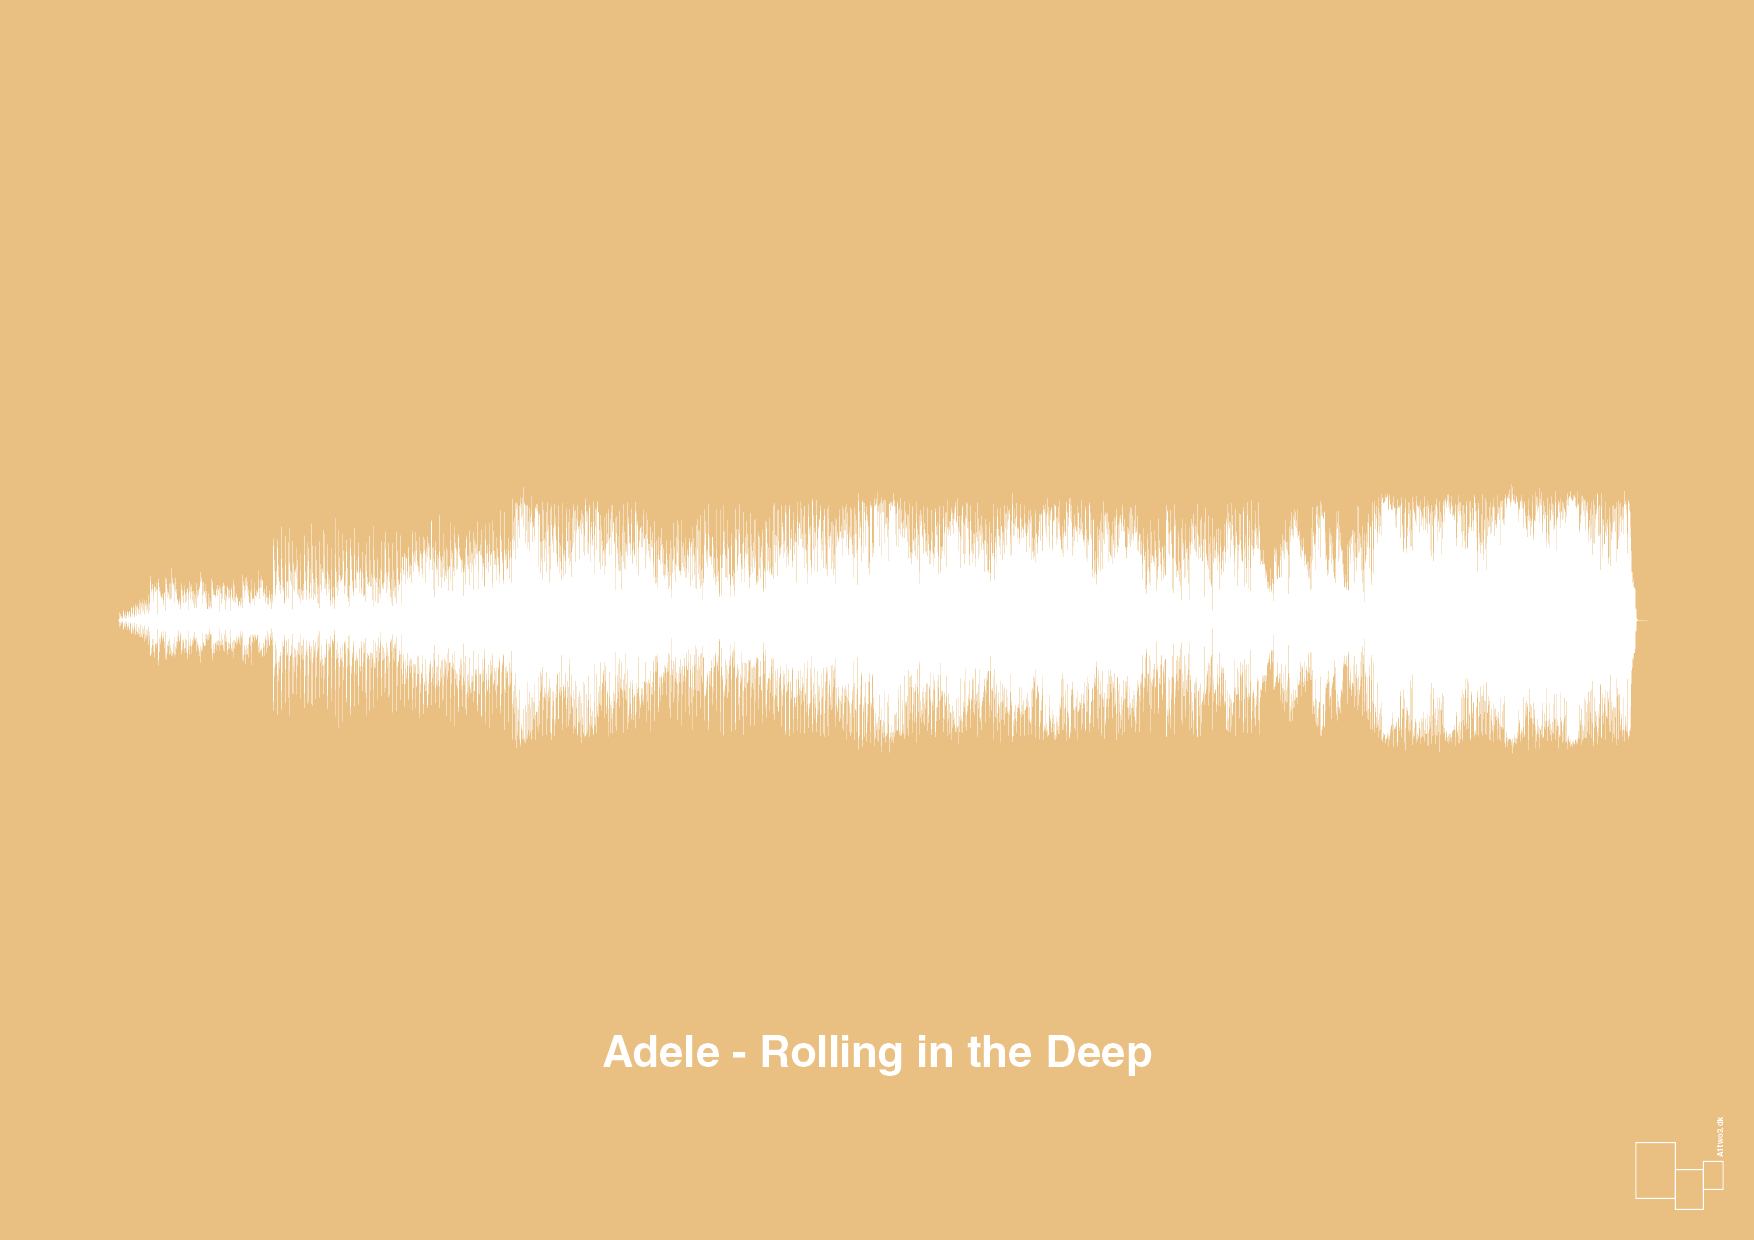 adele - rolling in the deep - Plakat med Musik i Charismatic